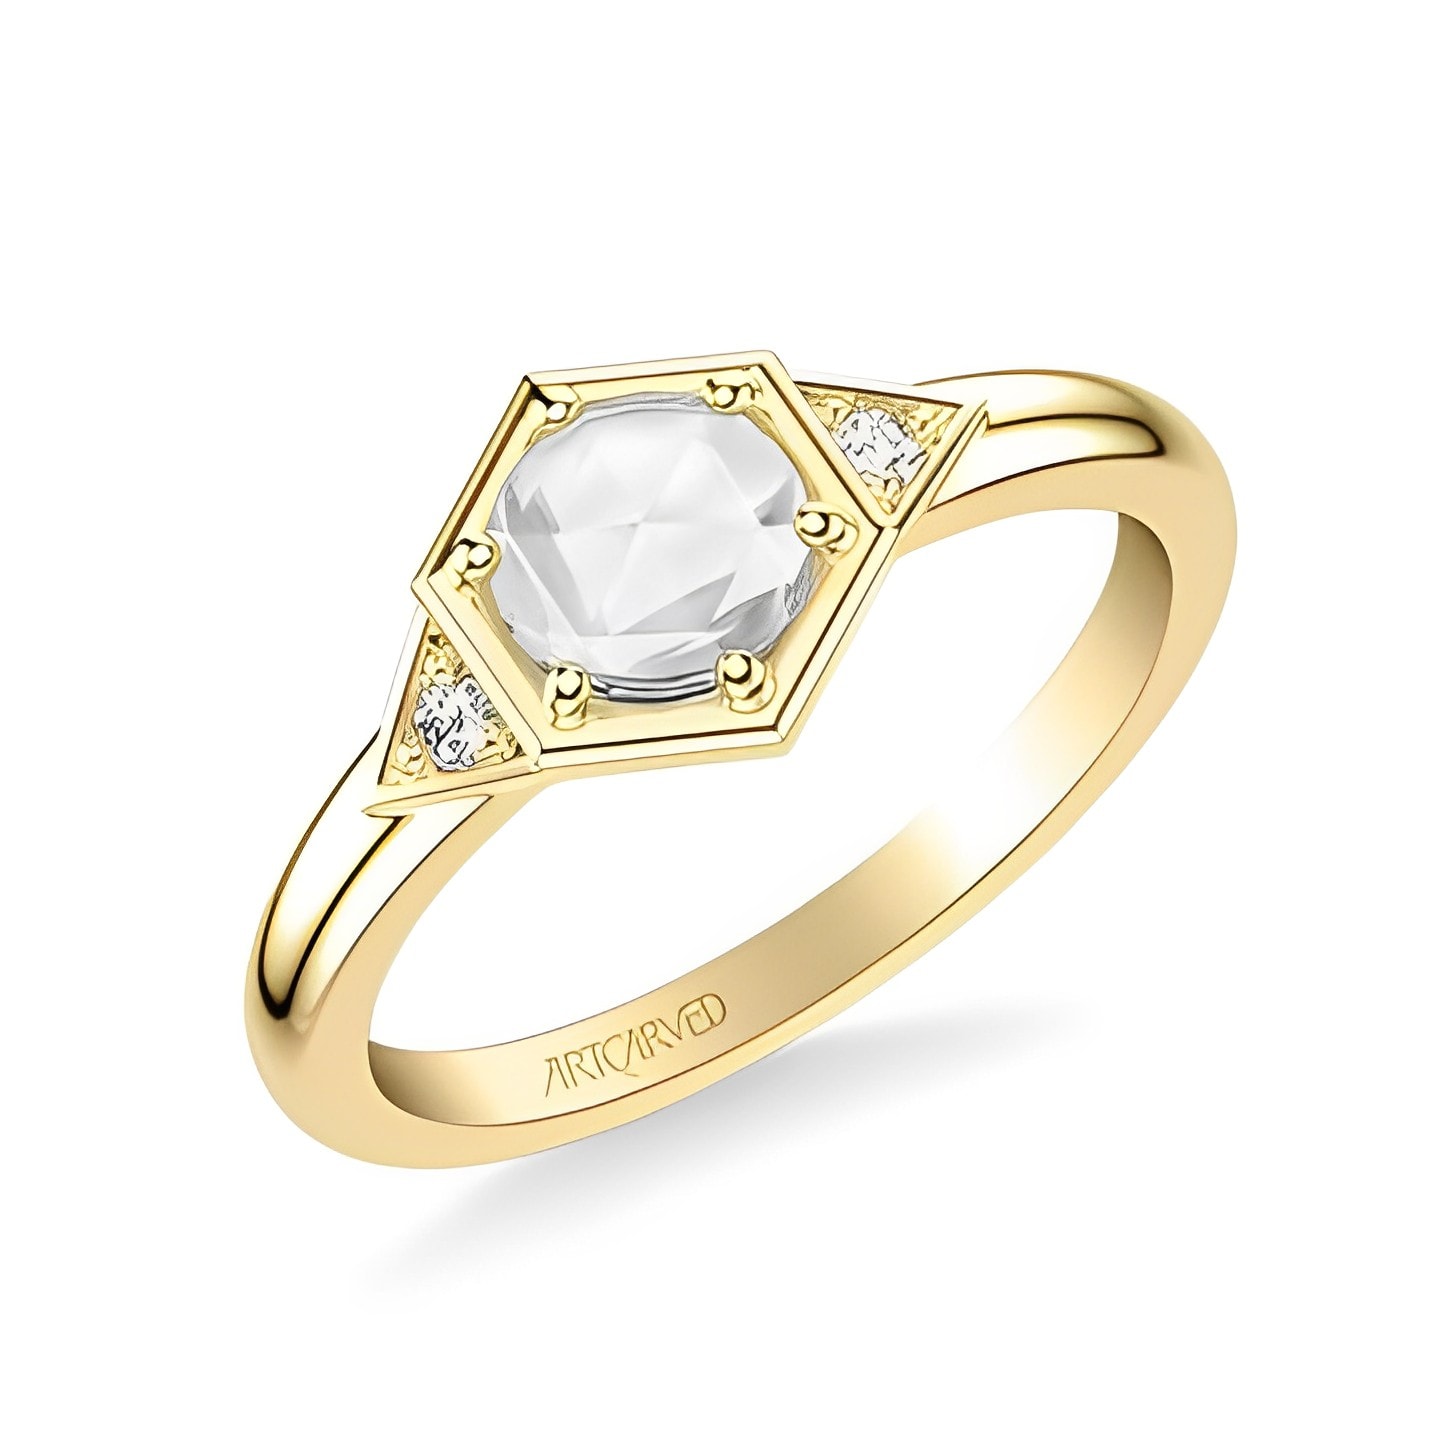 rose cut diamond engagement ring in yellow gold setting